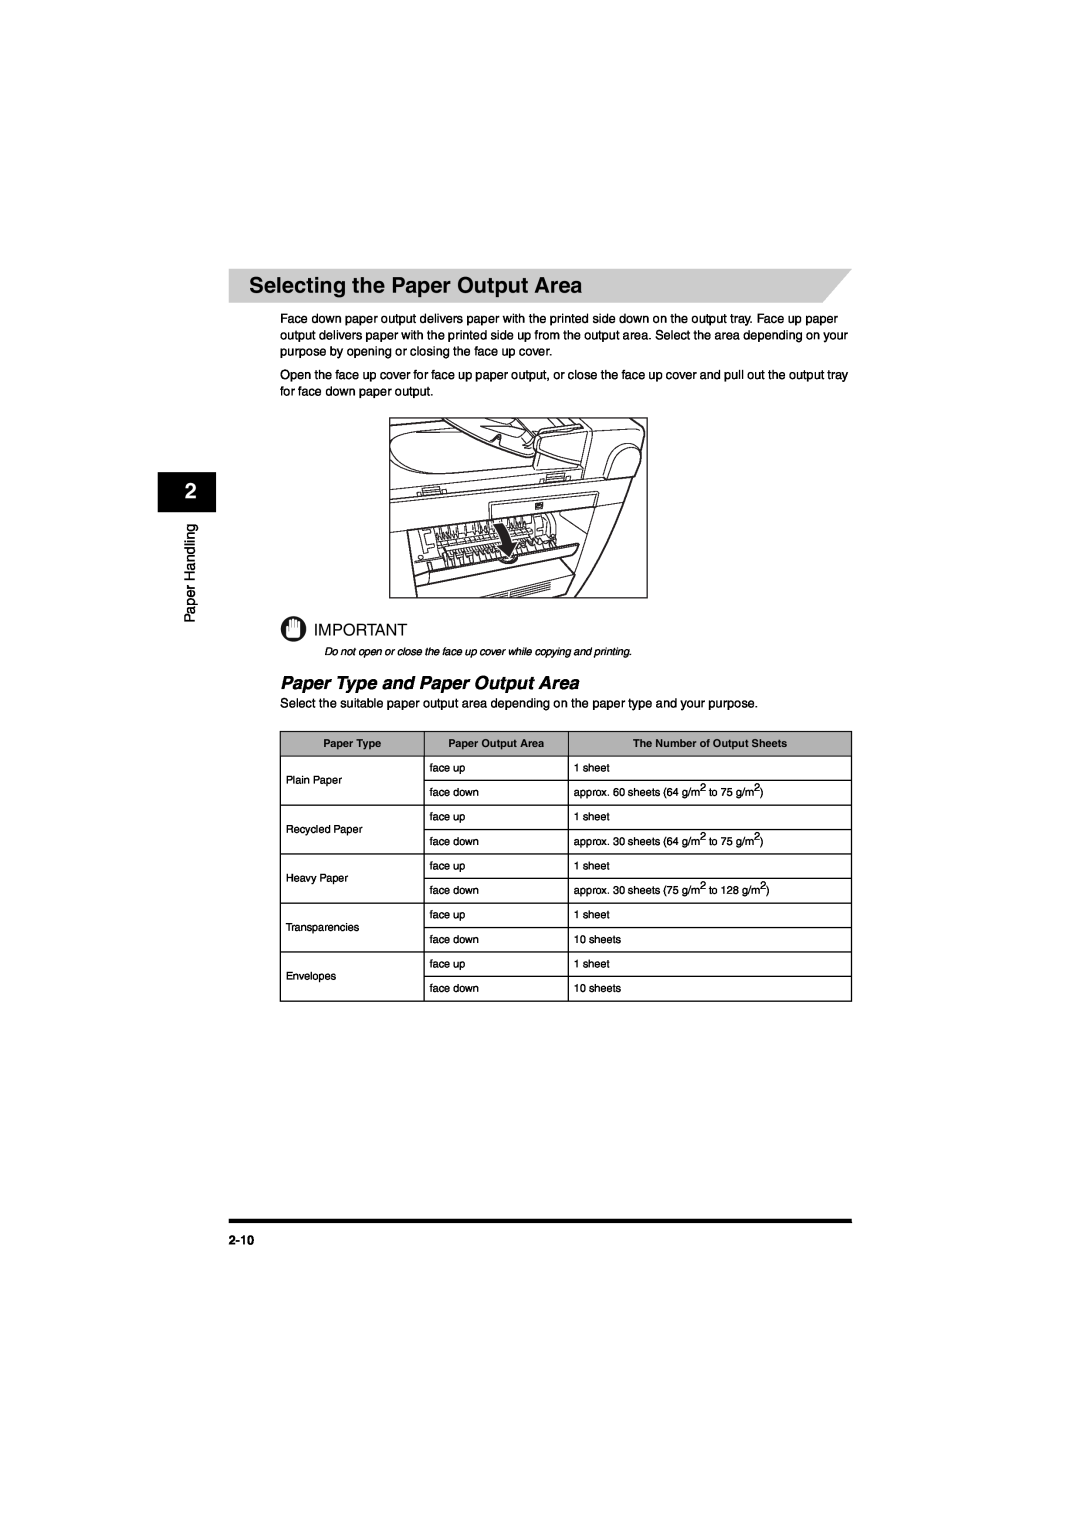 Canon MF5650 manual Selecting the Paper Output Area, Paper Type and Paper Output Area, Paper Handling 